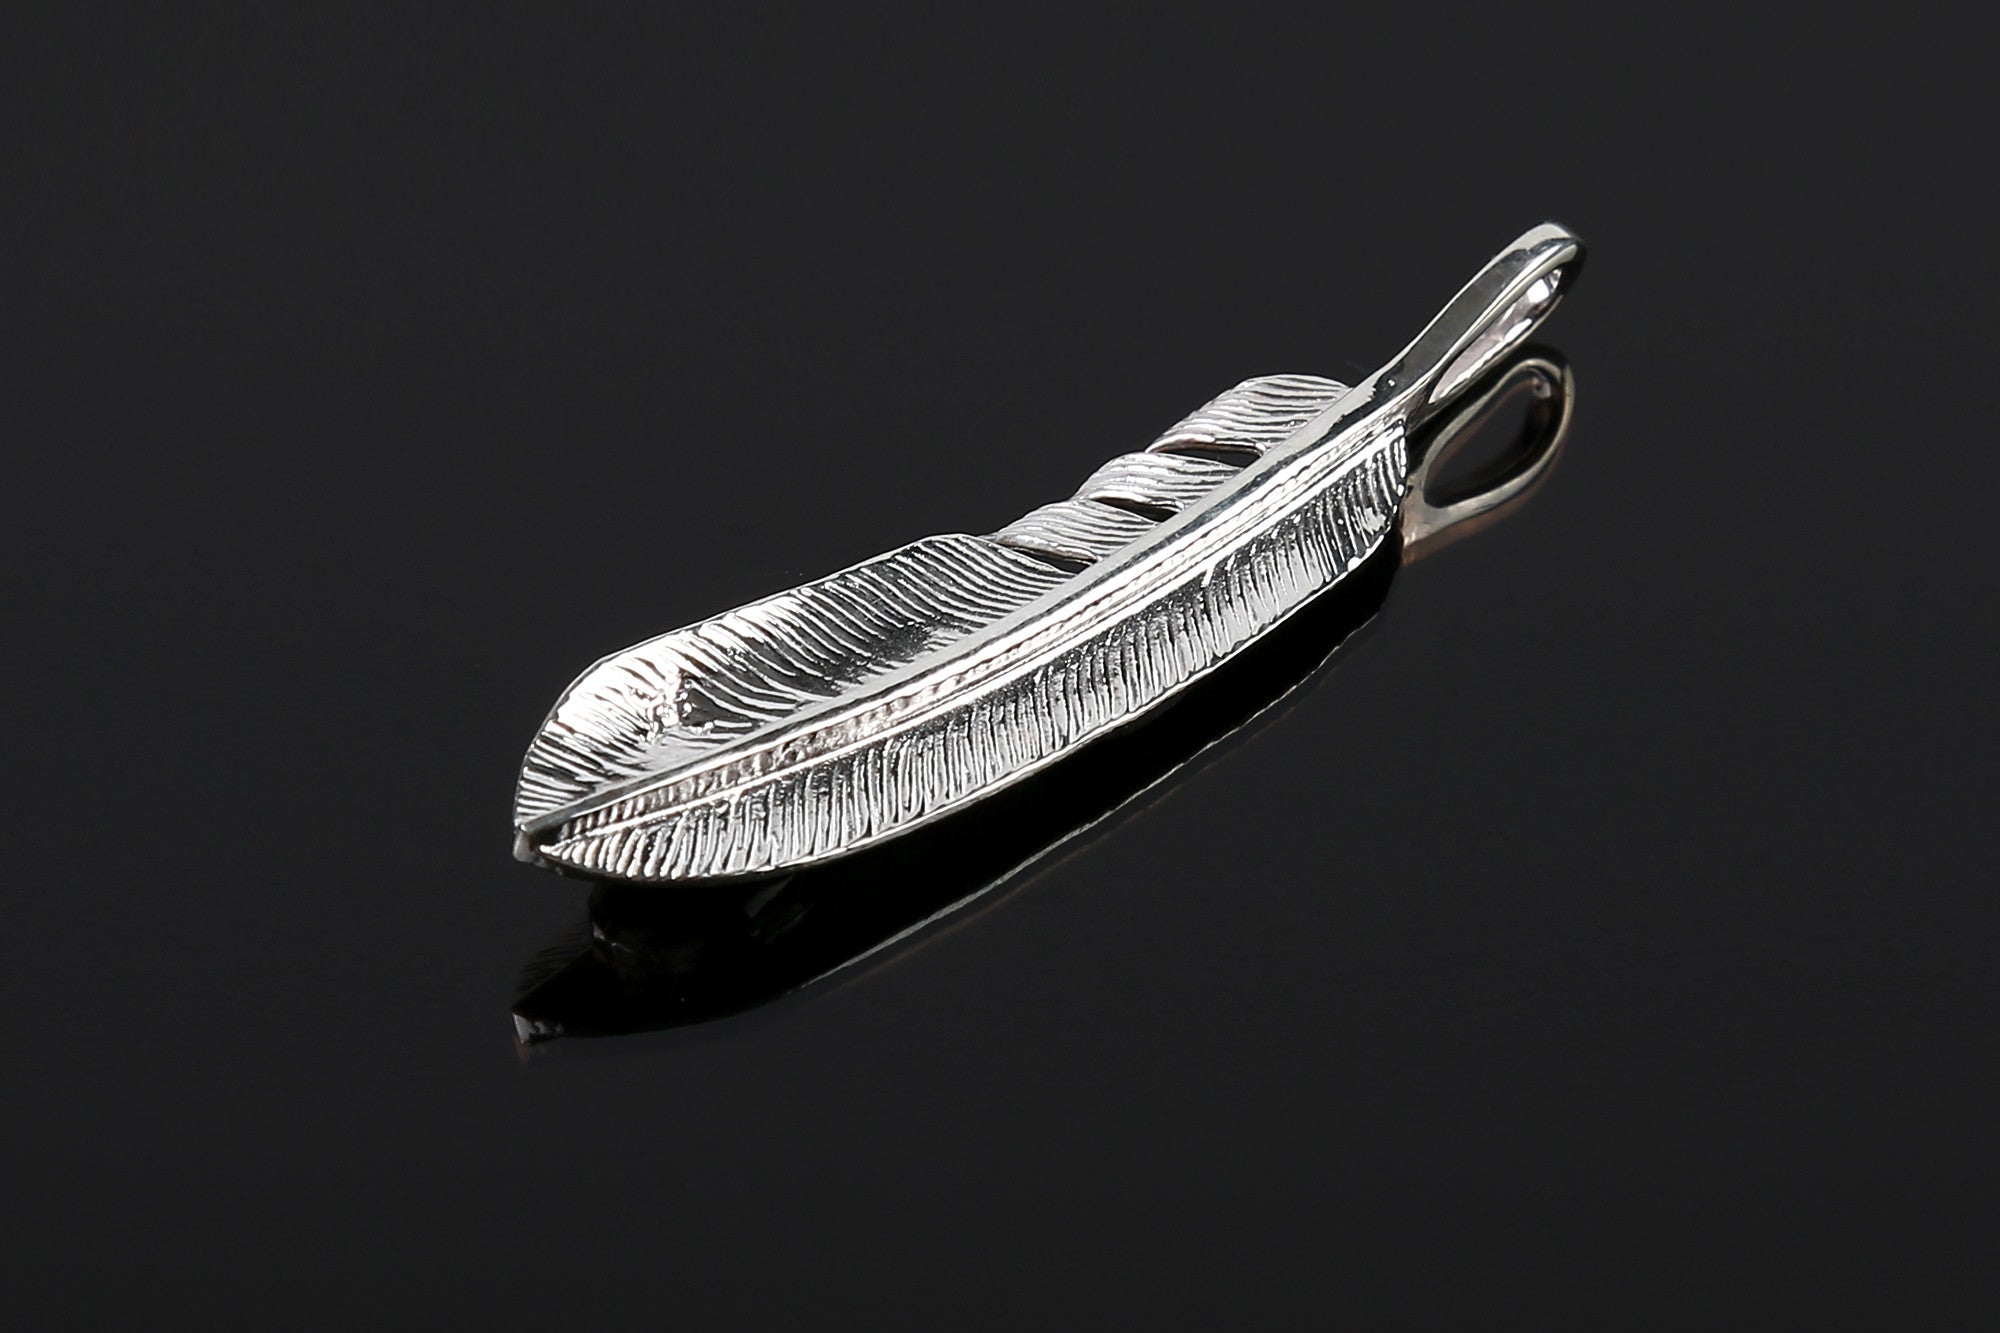 First Arrow's Medium "Soulo" Feather Pendant